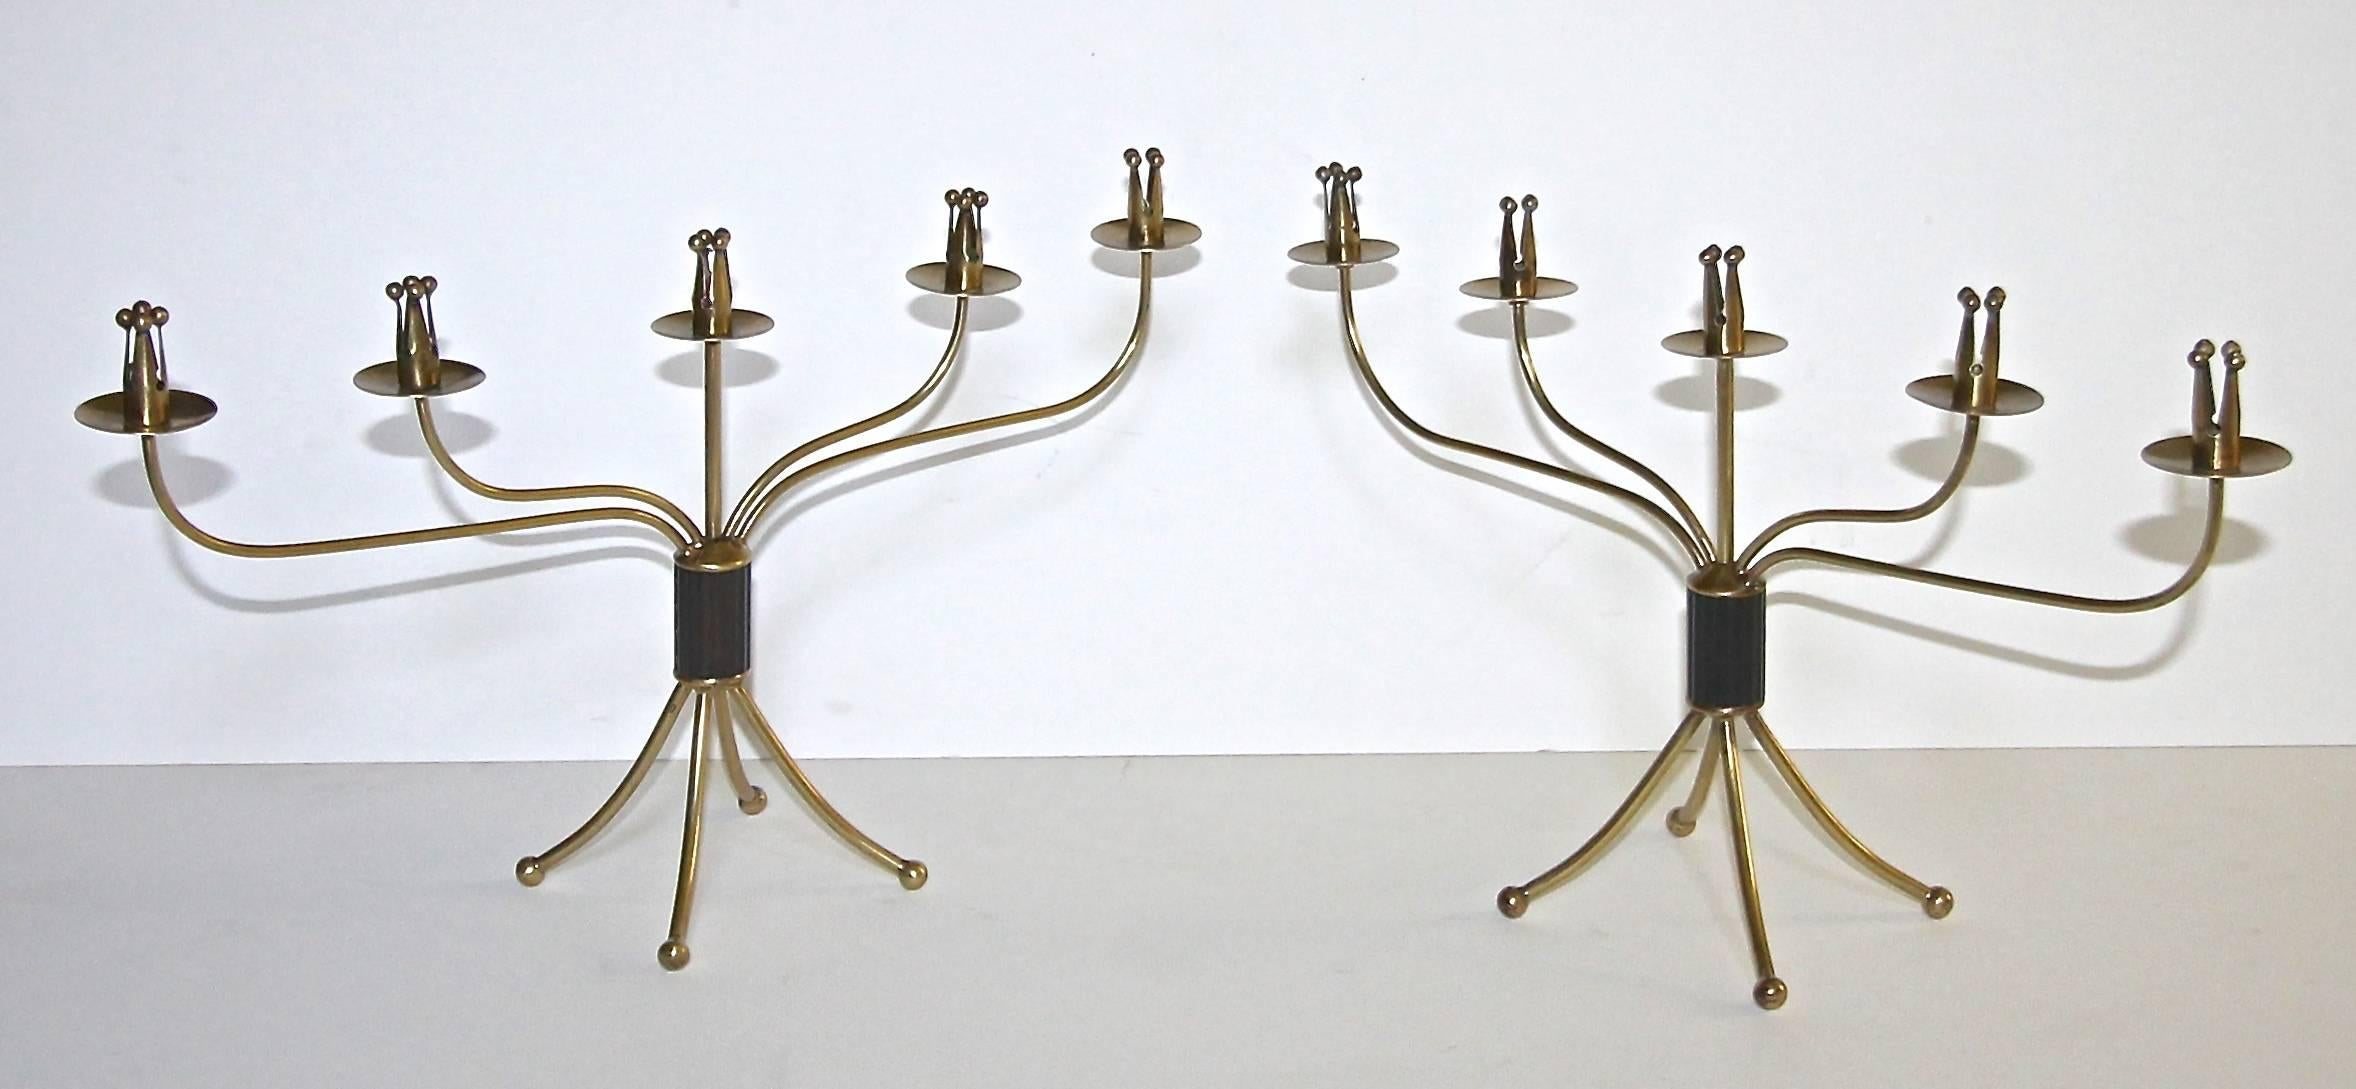 Pair of rare Swedish brass and partially patinated five arm candelabras or candlesticks, stamped Made in Sweden. Nice overall warm patina to brass finish.